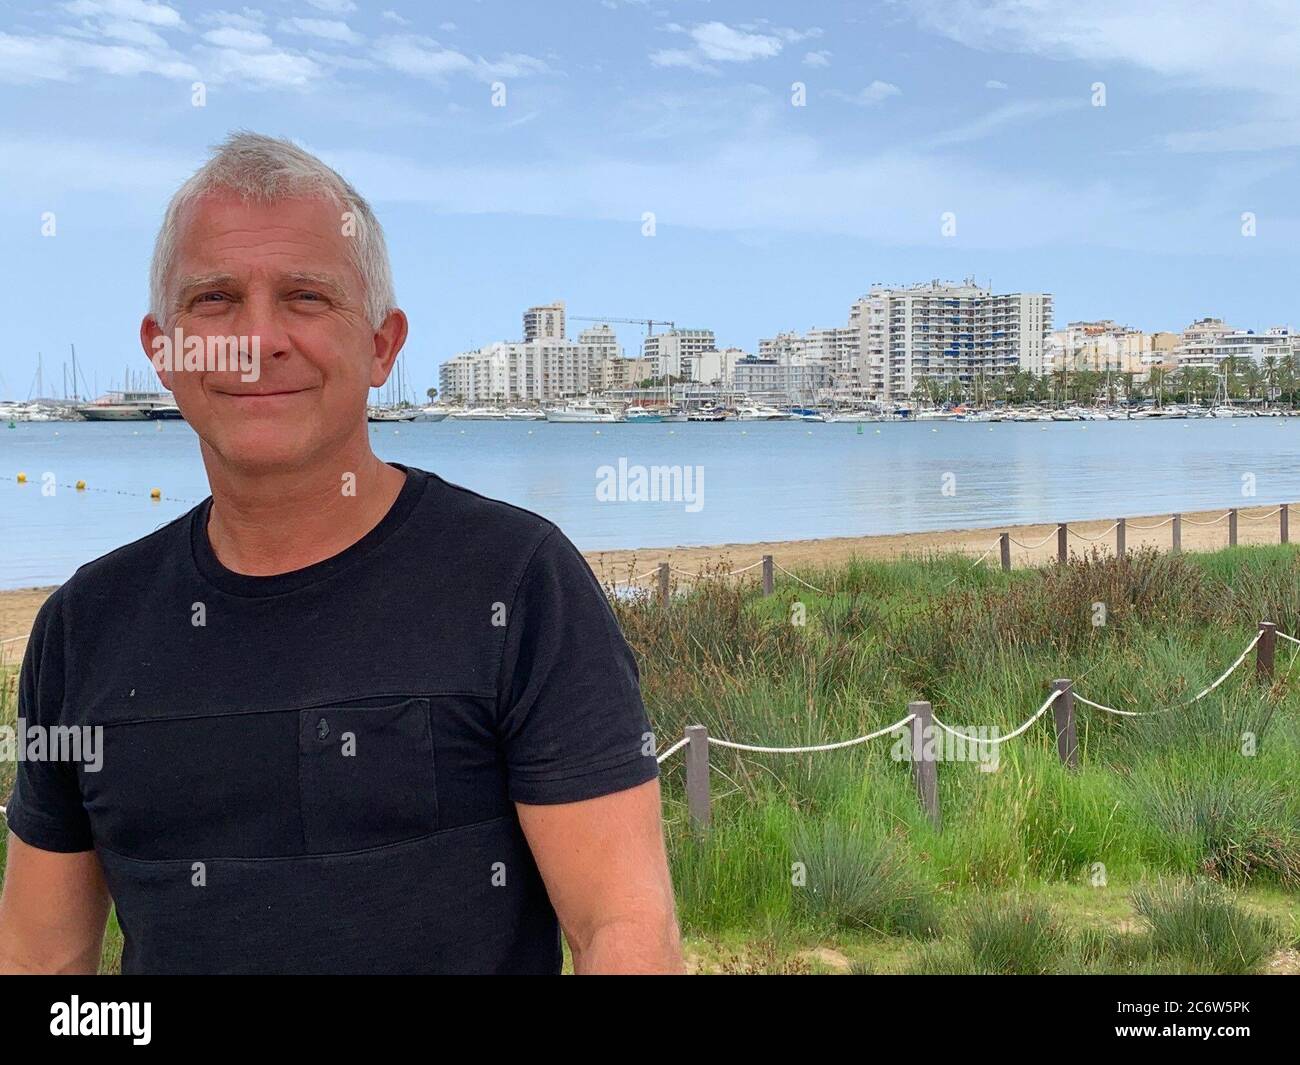 Rengør rummet forhistorisk dommer Dave Clarke, 57, a care home director from Bristol, who is on holiday with  his family in Ibiza. Expat British business owners have said new travel  quarantine rules are a "lifeline" for